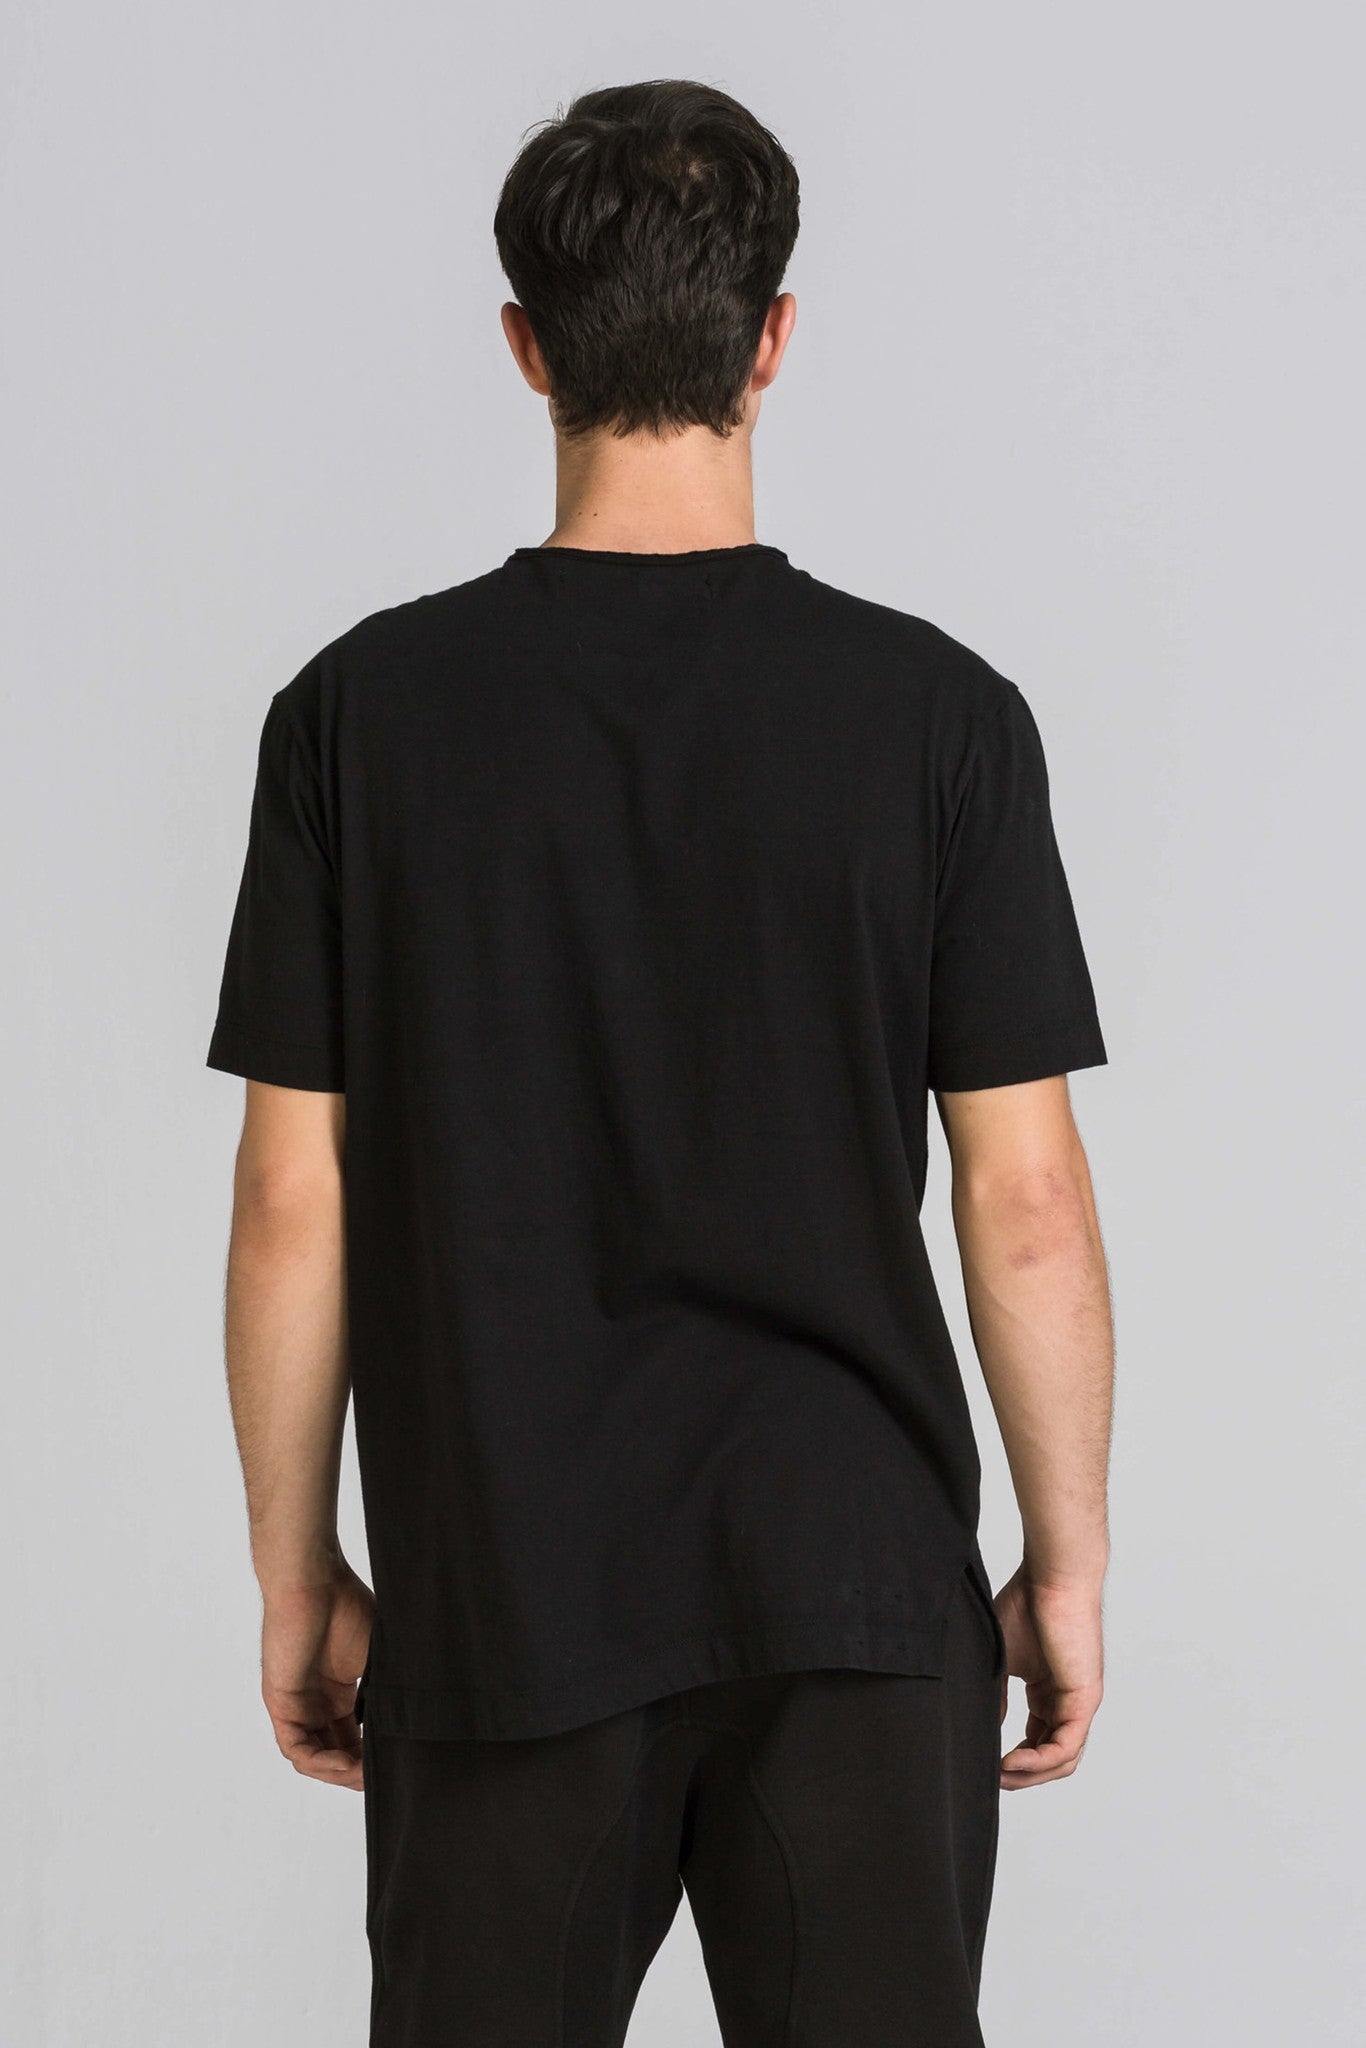 CONNECTION BLACK TEE